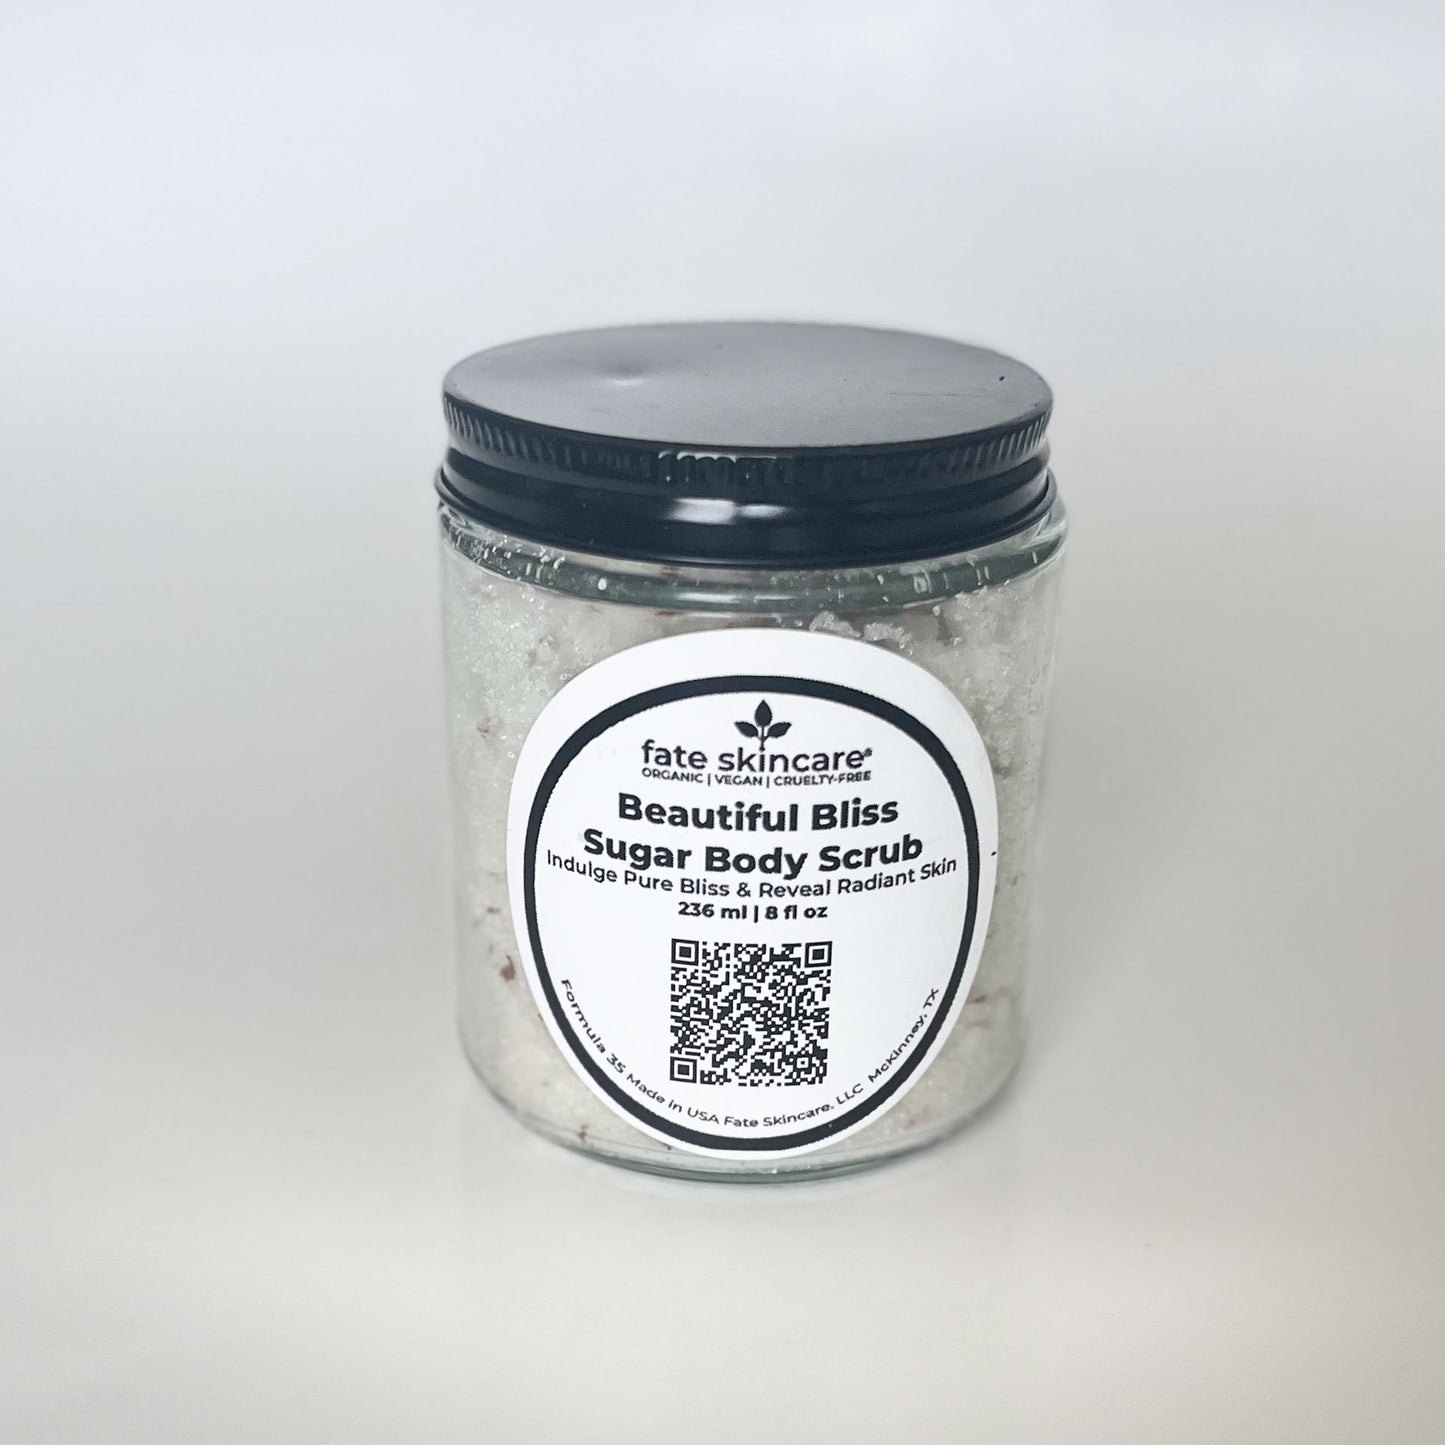 Fate Skincare's Beautiful Bliss Sugar Body Scrub in a clear glass jar with a black lid, featuring a round label displaying the product name and company logo.